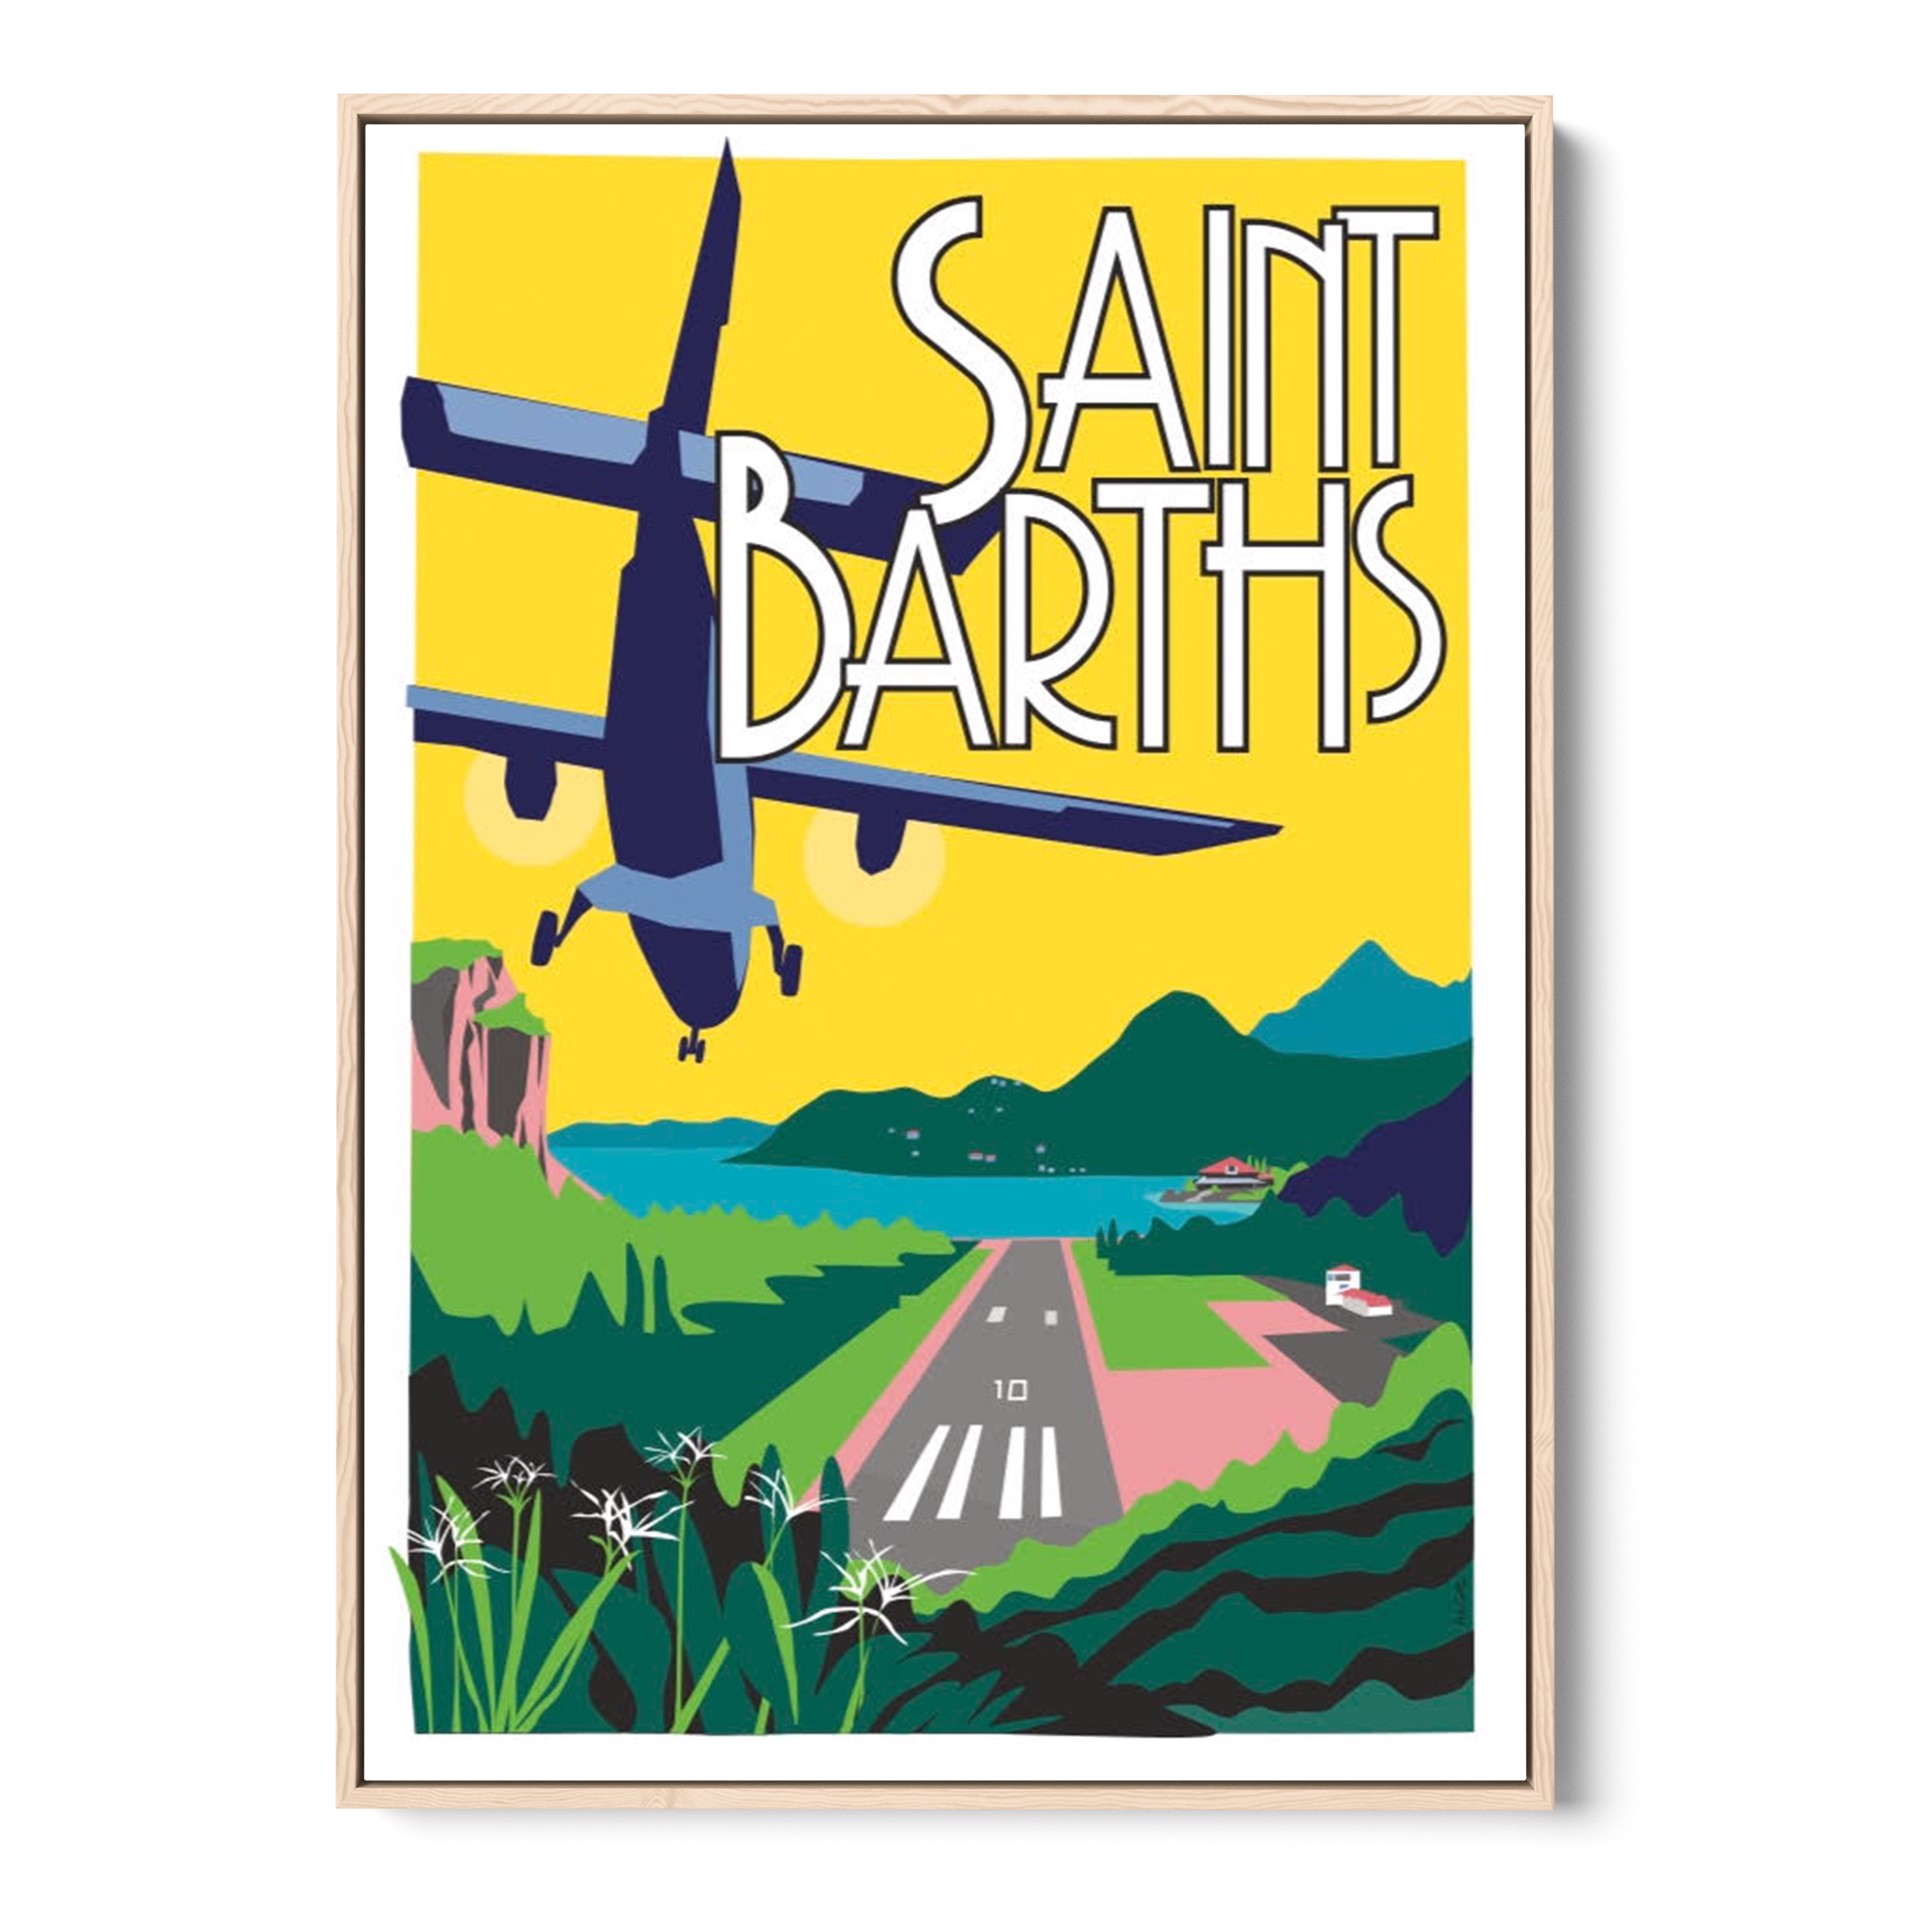 Welcome to St Barth!